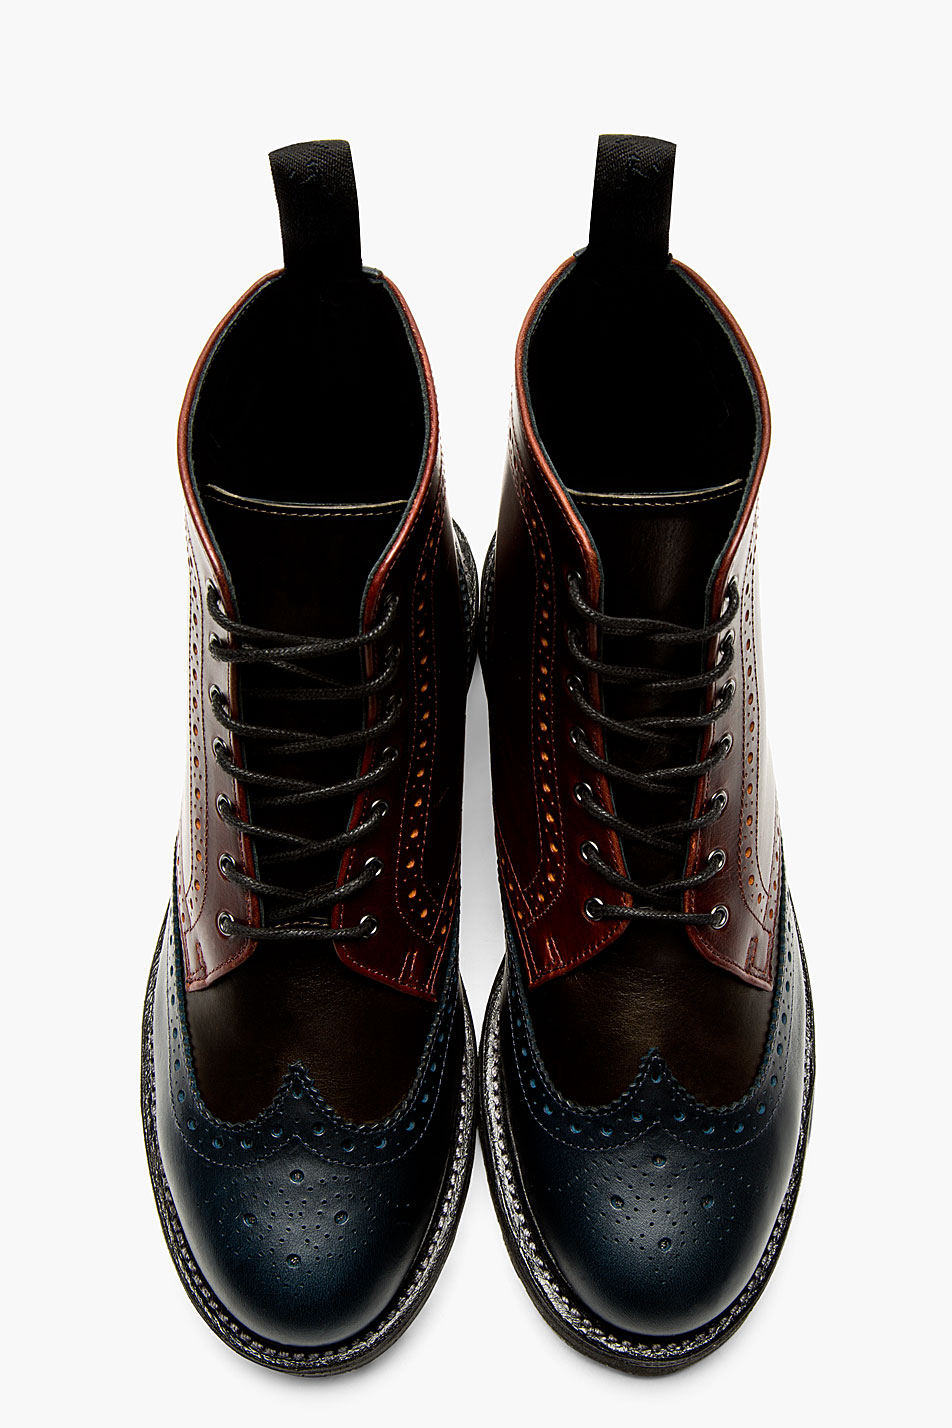 Lyst - Dr. Martens Burgundy Leather 8_eye Bentley Ankle Boots in Blue ...